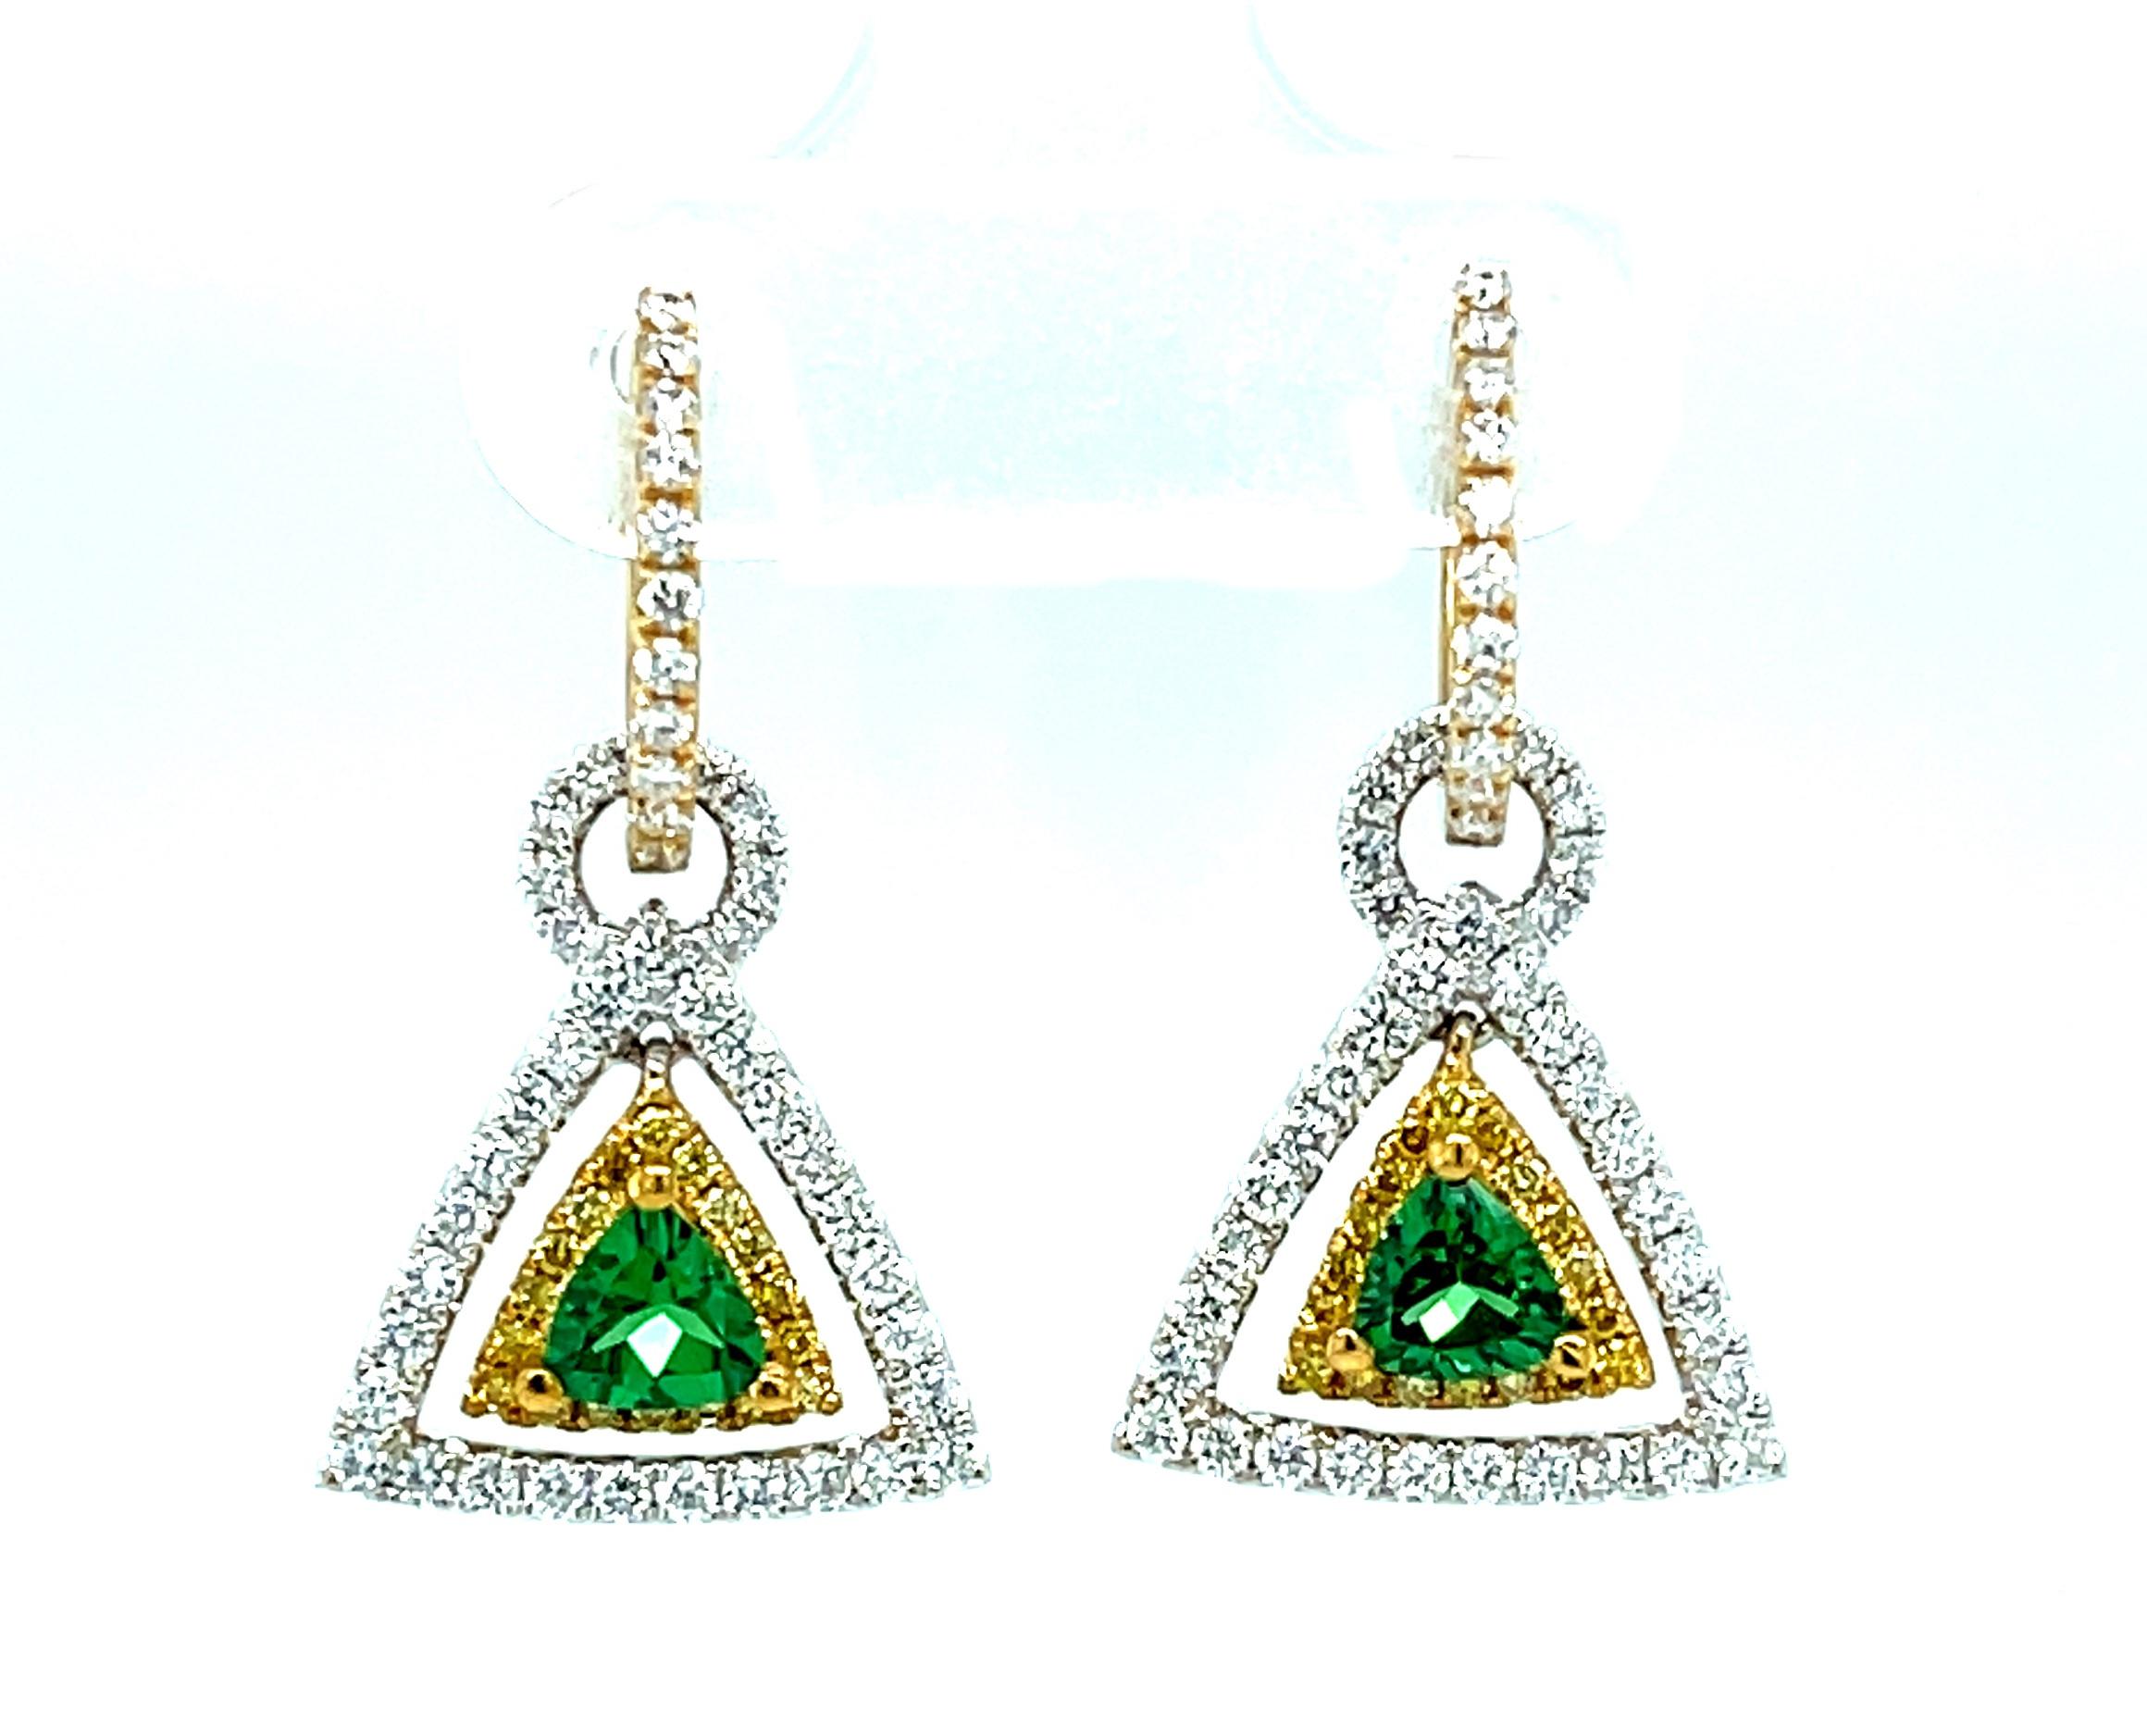 These earrings are gorgeous and stunning! Two trillion cut tsavorite garnets are set with round   brilliant-cut diamonds and bright yellow sapphires. The garnets are a beautiful, brilliant grass-green color. The yellow sapphires and diamonds